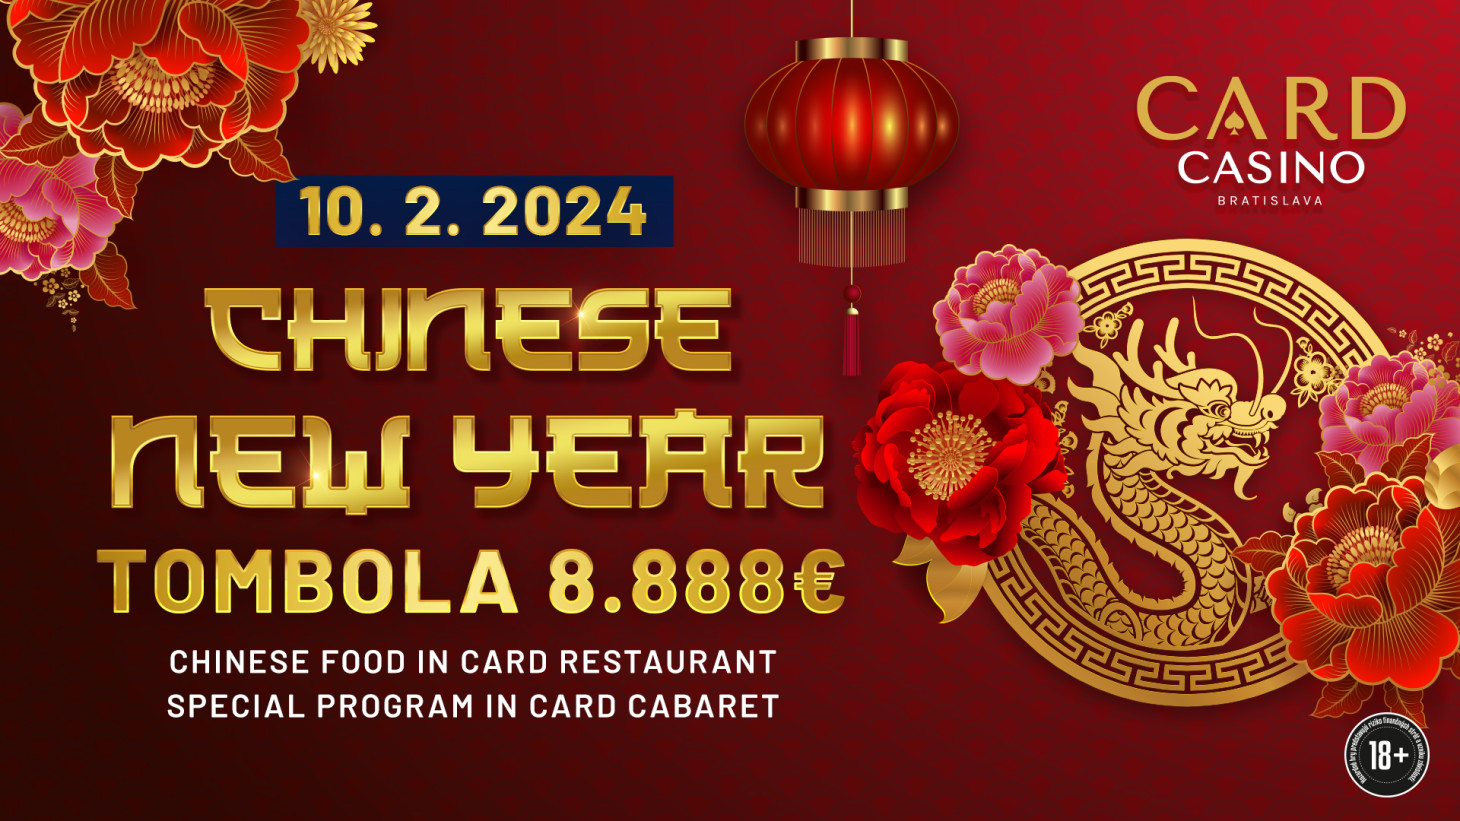 Come celebrate the Chinese New Year of the Dragon with a fabulous raffle for 8.888€